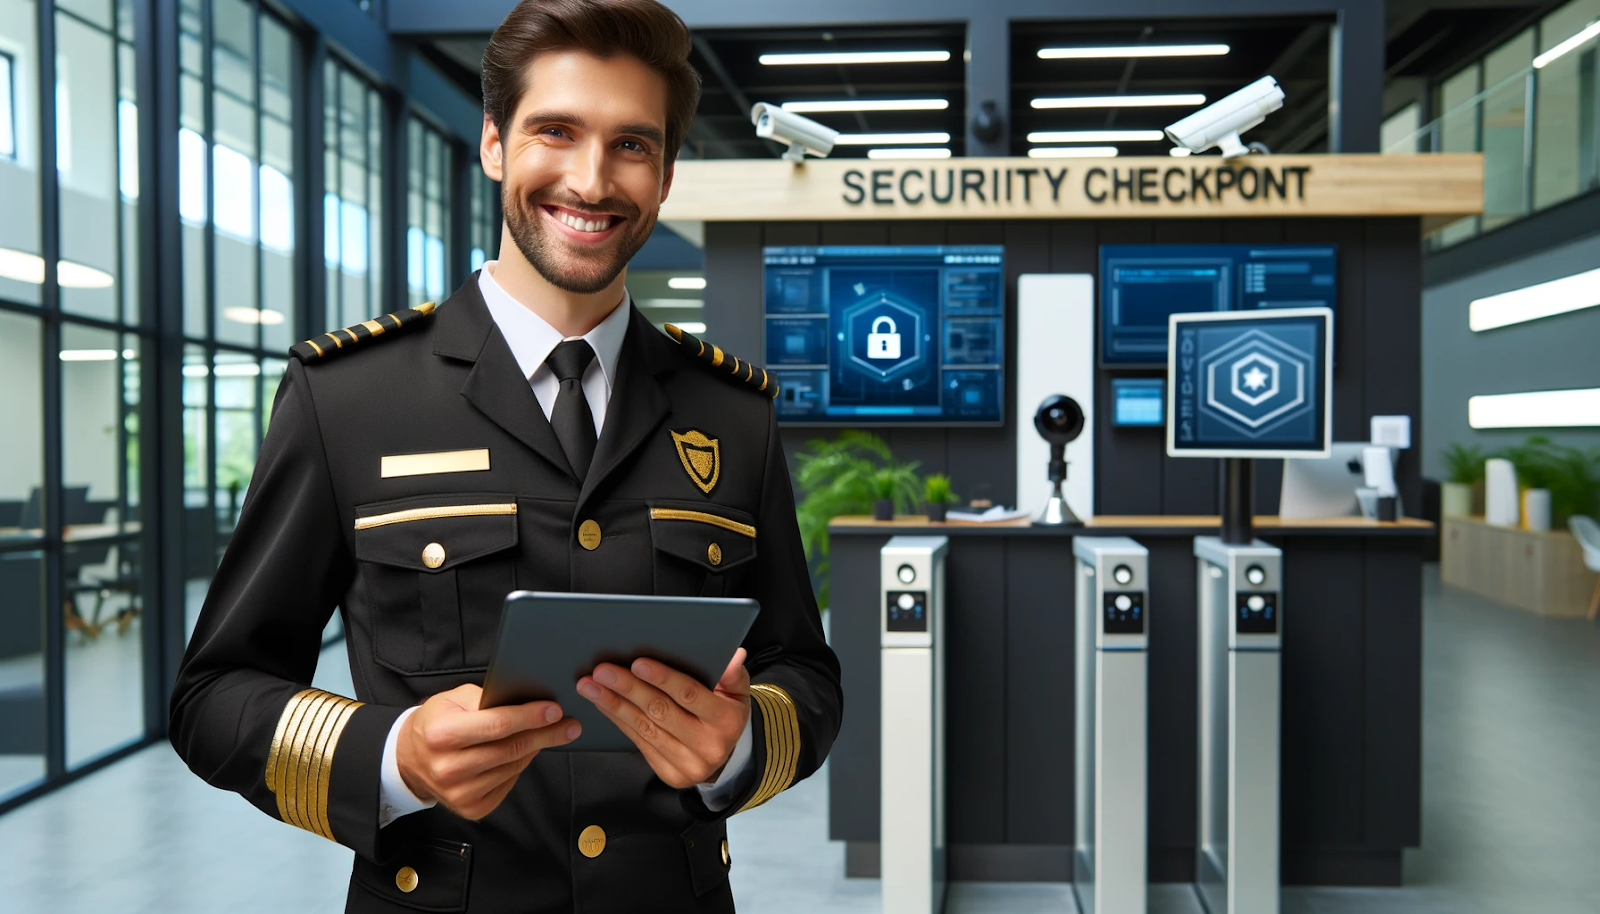 Cheerful security guard in a black and gold uniform reviewing a tablet for cybersecurity training.